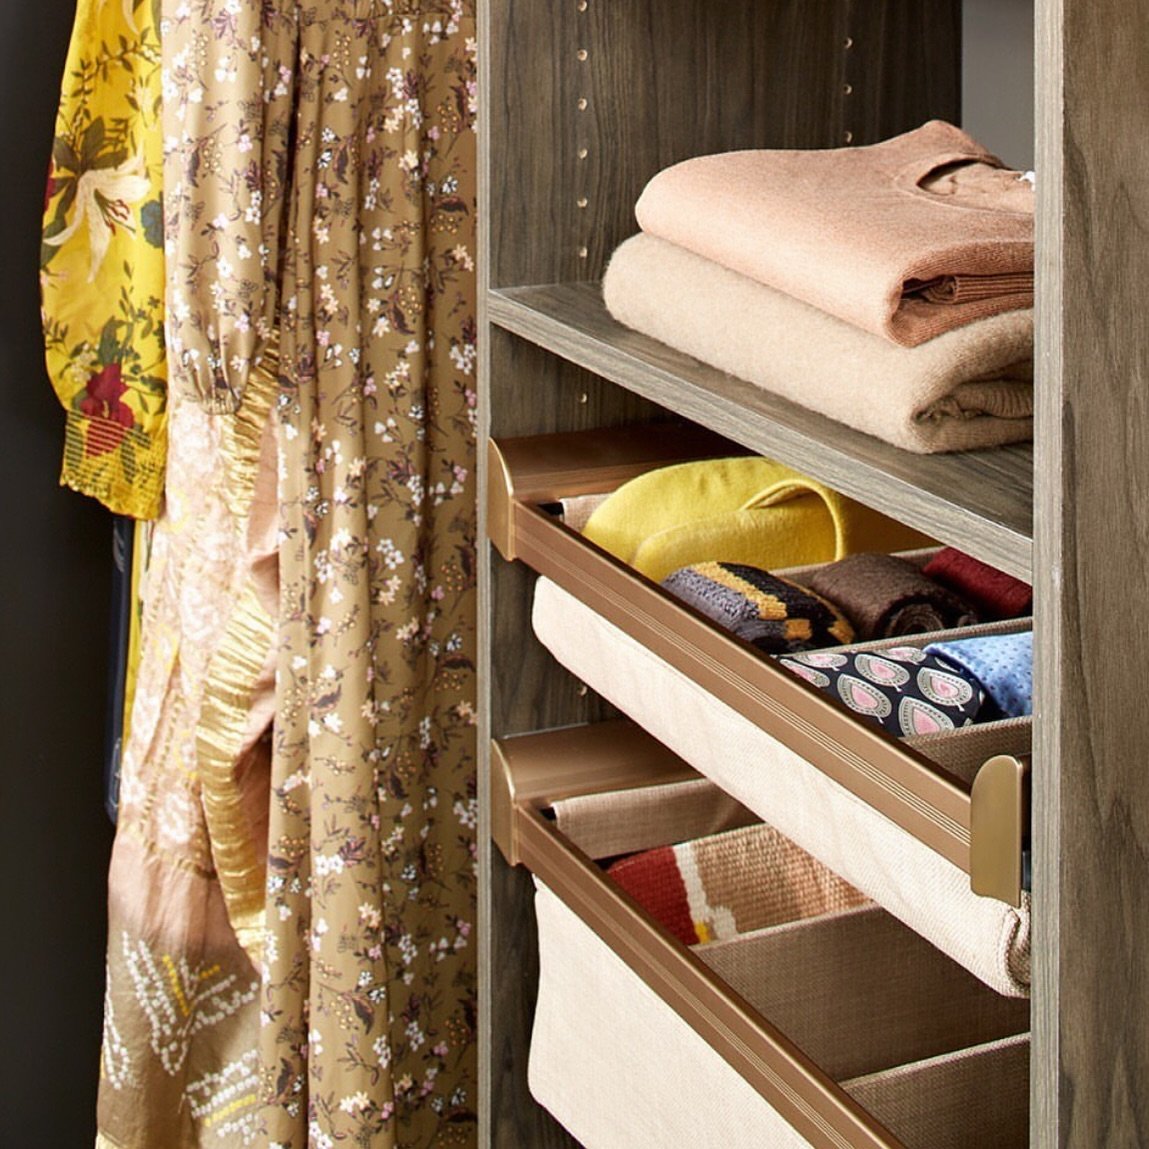 Fabric drawers are a great alternative to steel wire baskets and include customizable storage compartments. Learn more at simplyclosets.ca
-
#lingeriedrawers @taghardware #simplyclosets #fallclosetorganization #fallcloset #customclosets #organizedhom